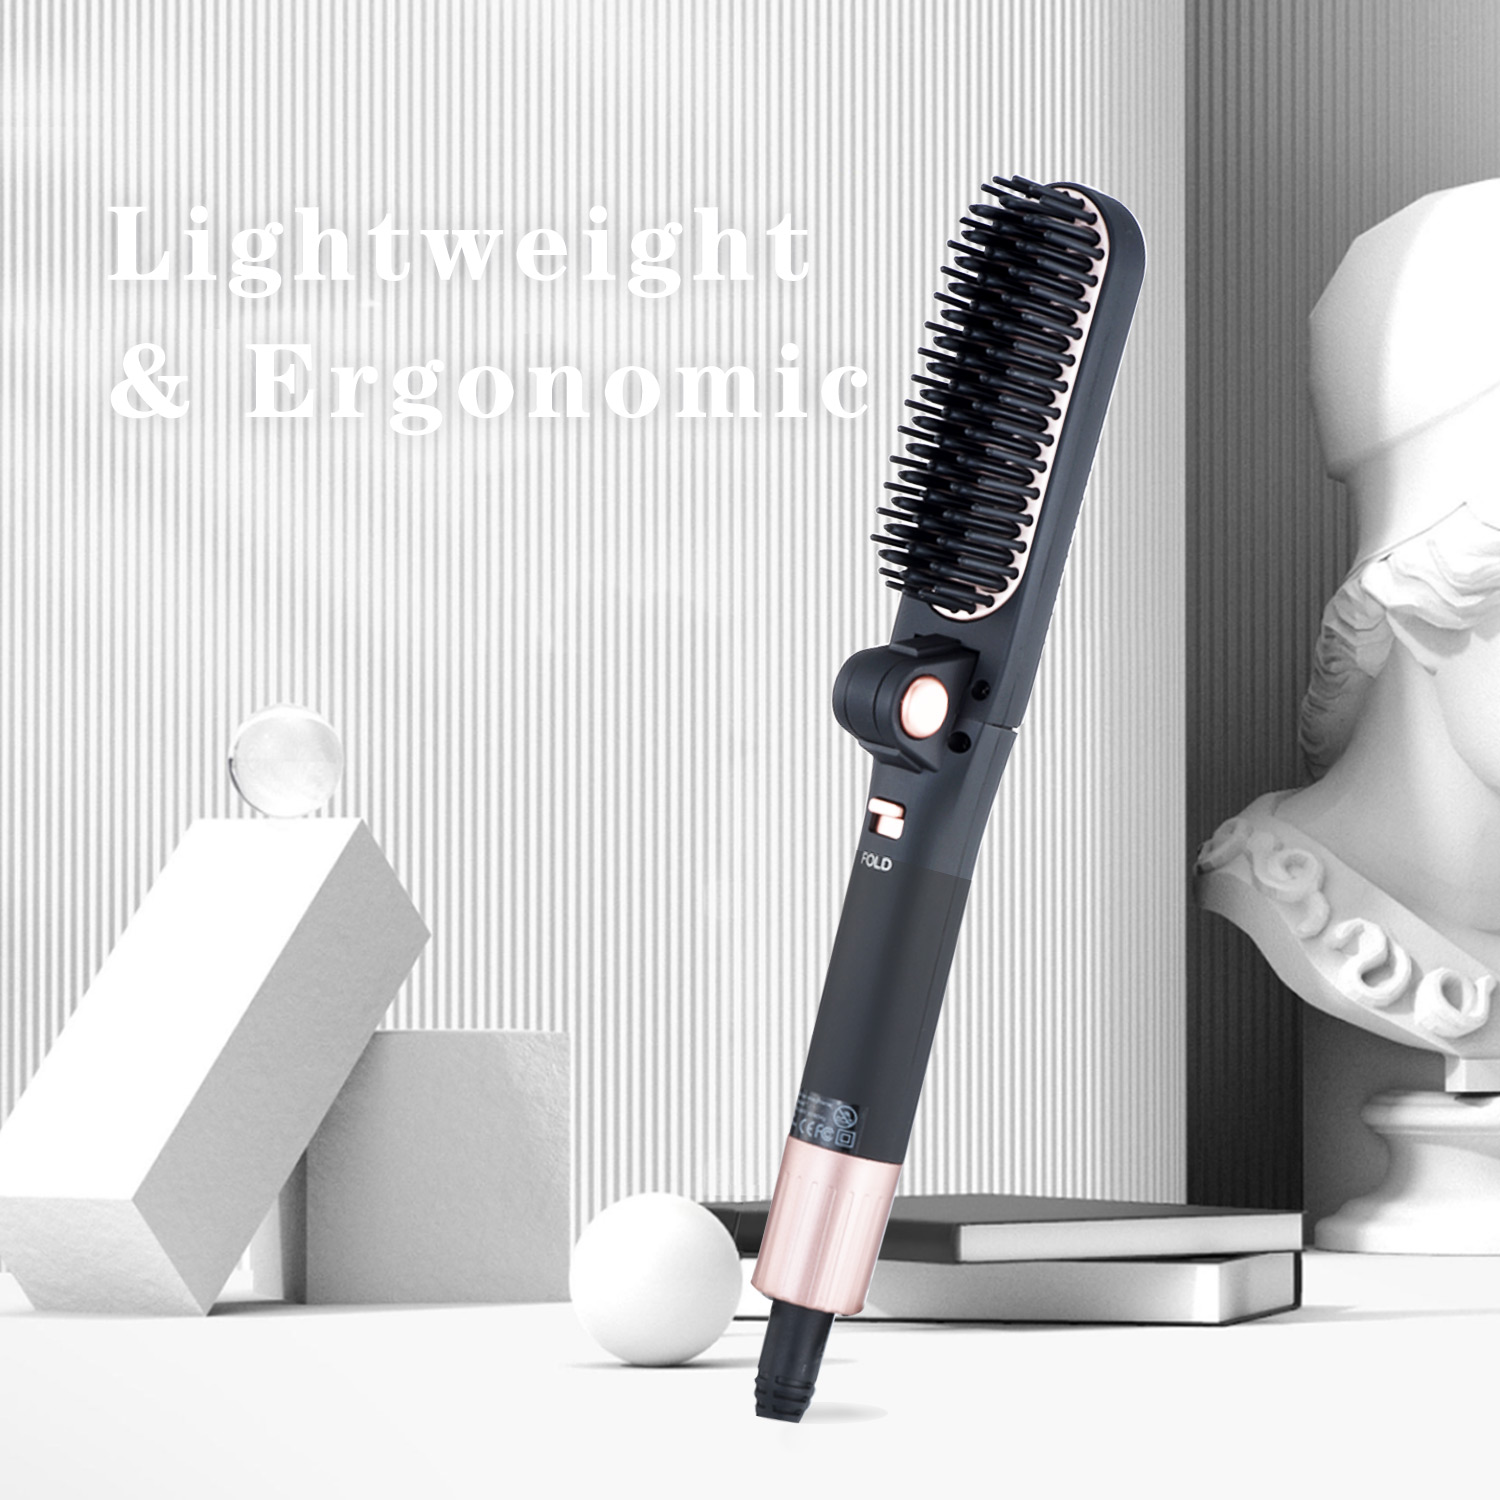 All-in-One Smoothing Dryer Brush, Hair Dryer & Hot Air Brush Featured Image